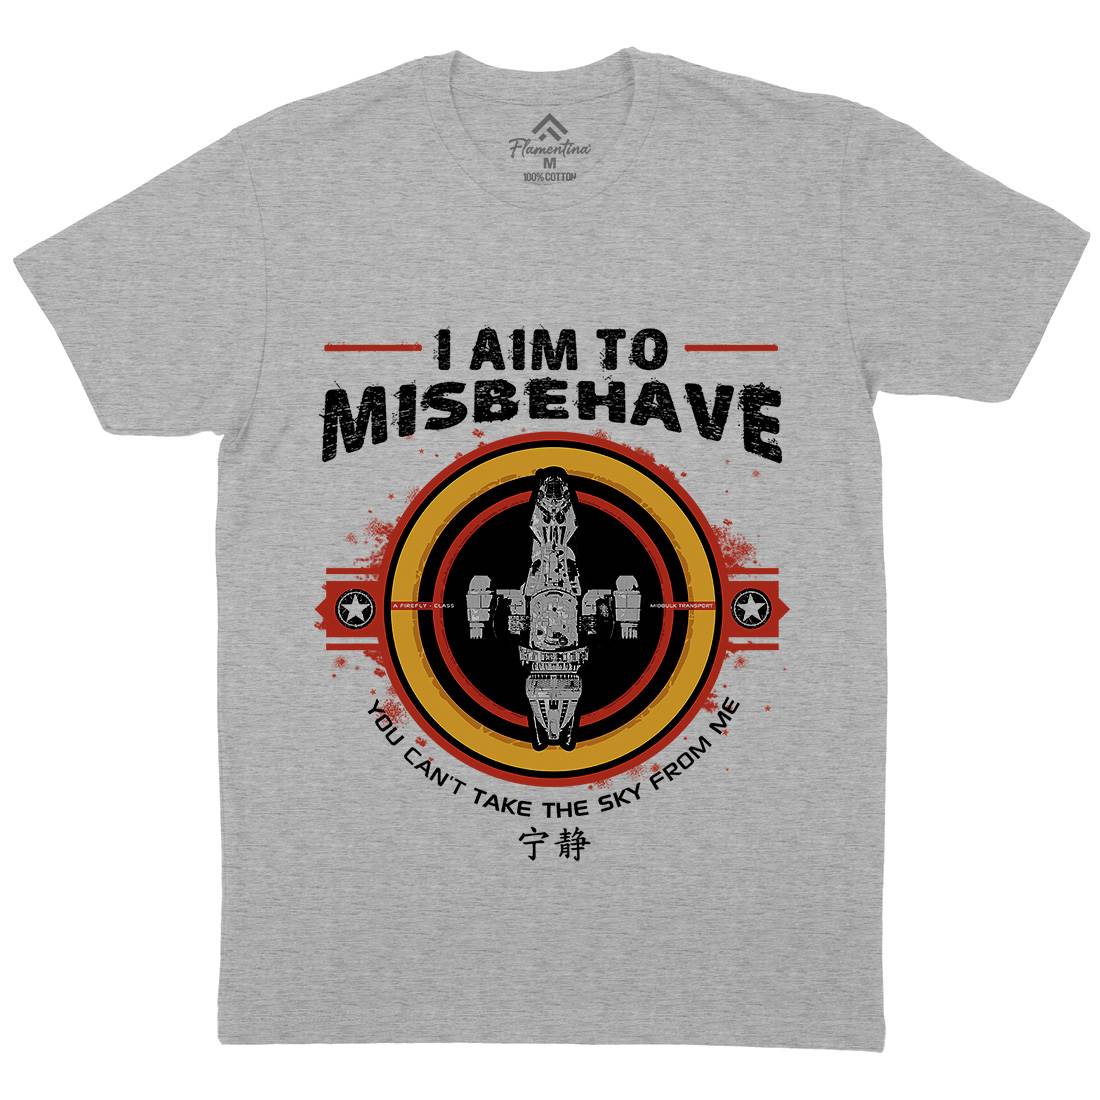 I Aim To Misbehave Mens Crew Neck T-Shirt Space D352